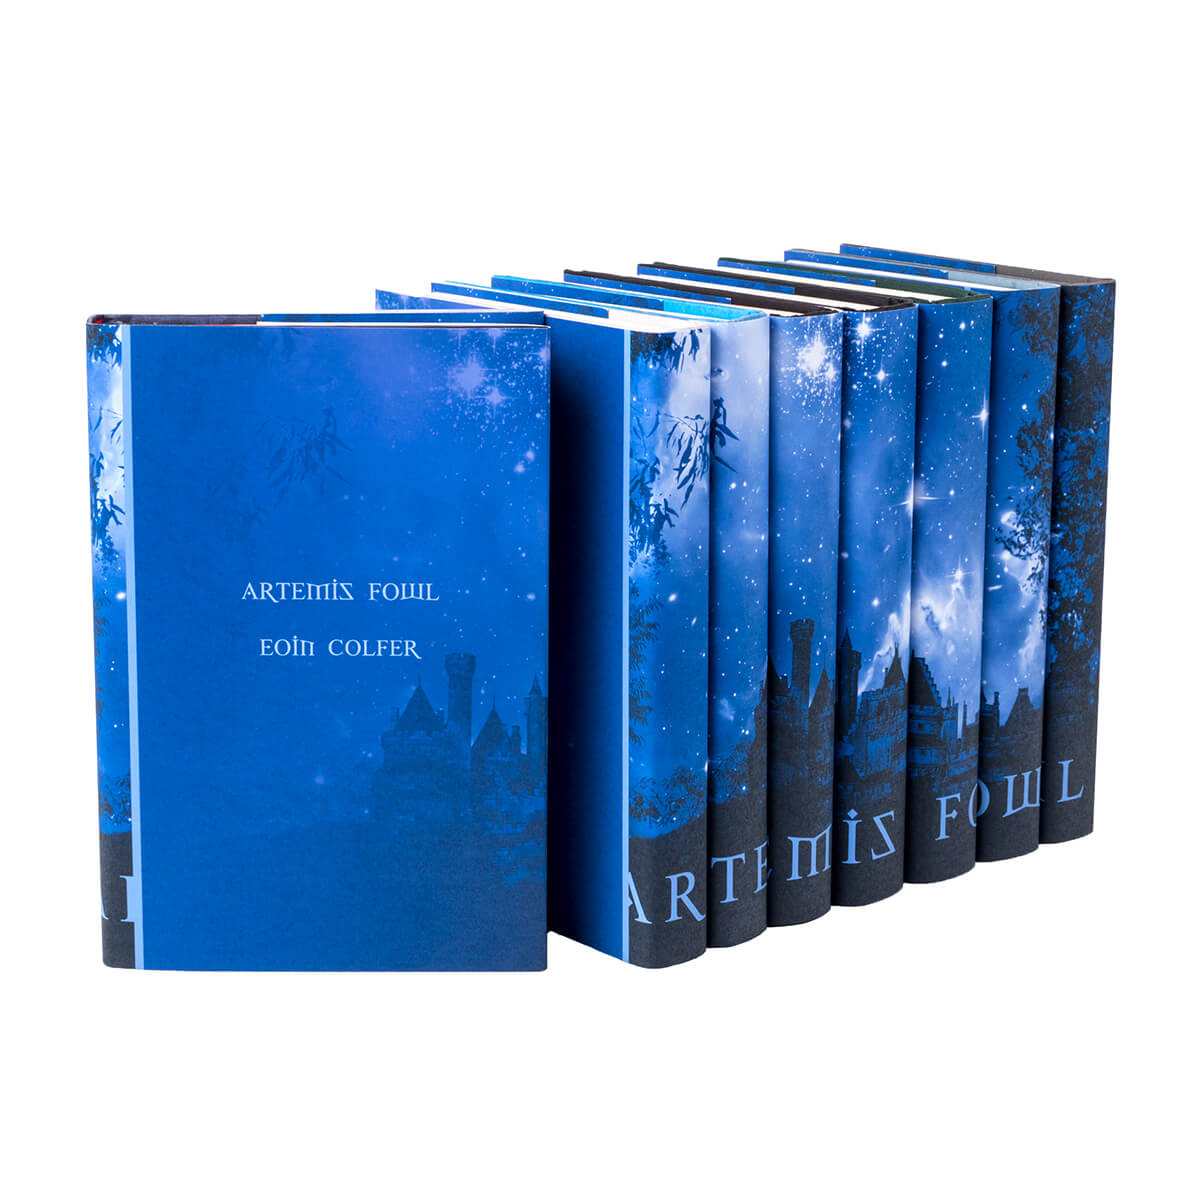 Our custom Jackets Only for the thrilling eight-novel Artemis Fowl series by Eoin Colfer will transform your books, capturing the enchantment and mystique of the legendary series. A great gift for owners of the book set!